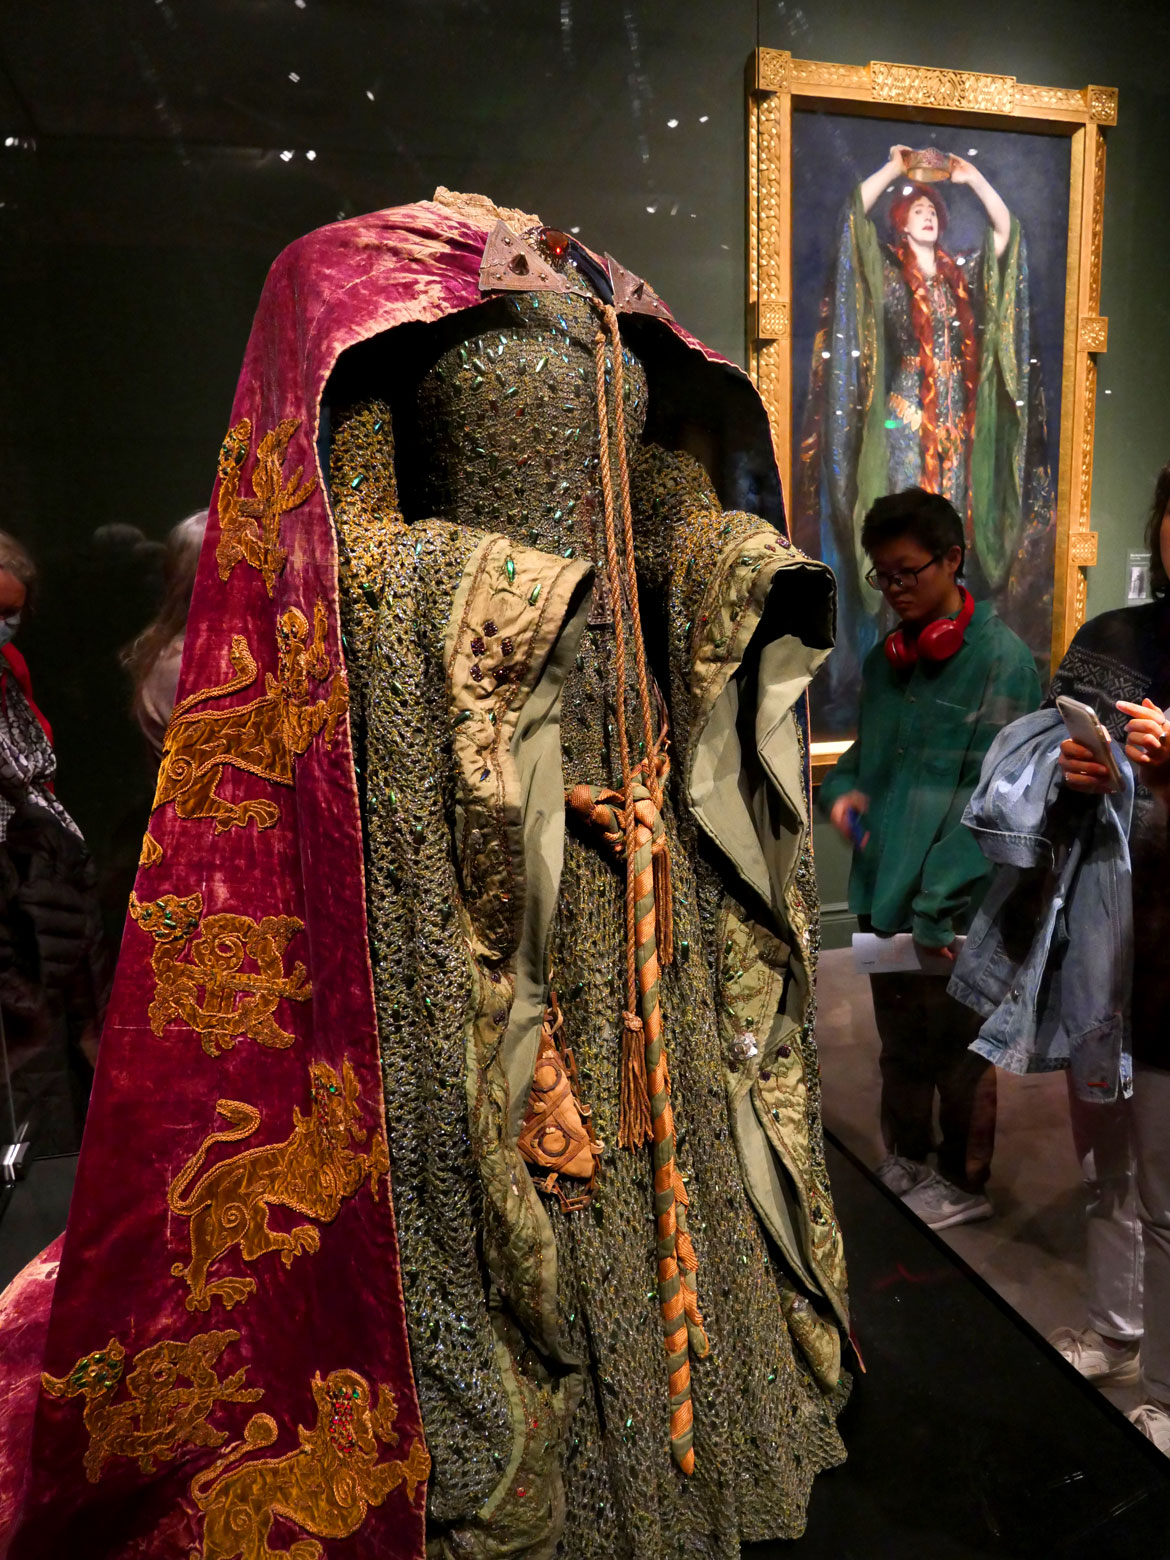 Alice Laura Comyns-Carr designed Beetle Wing Dress' for Lady Macbeth and John Singer Sargent, "Ellen Terry as Lady Macbeth," 1889, oil on canvas, in "Fashioned by Sargent" at Museum of Fine Arts, Boston, 2023 to 2024. (©Greg Cook photo)